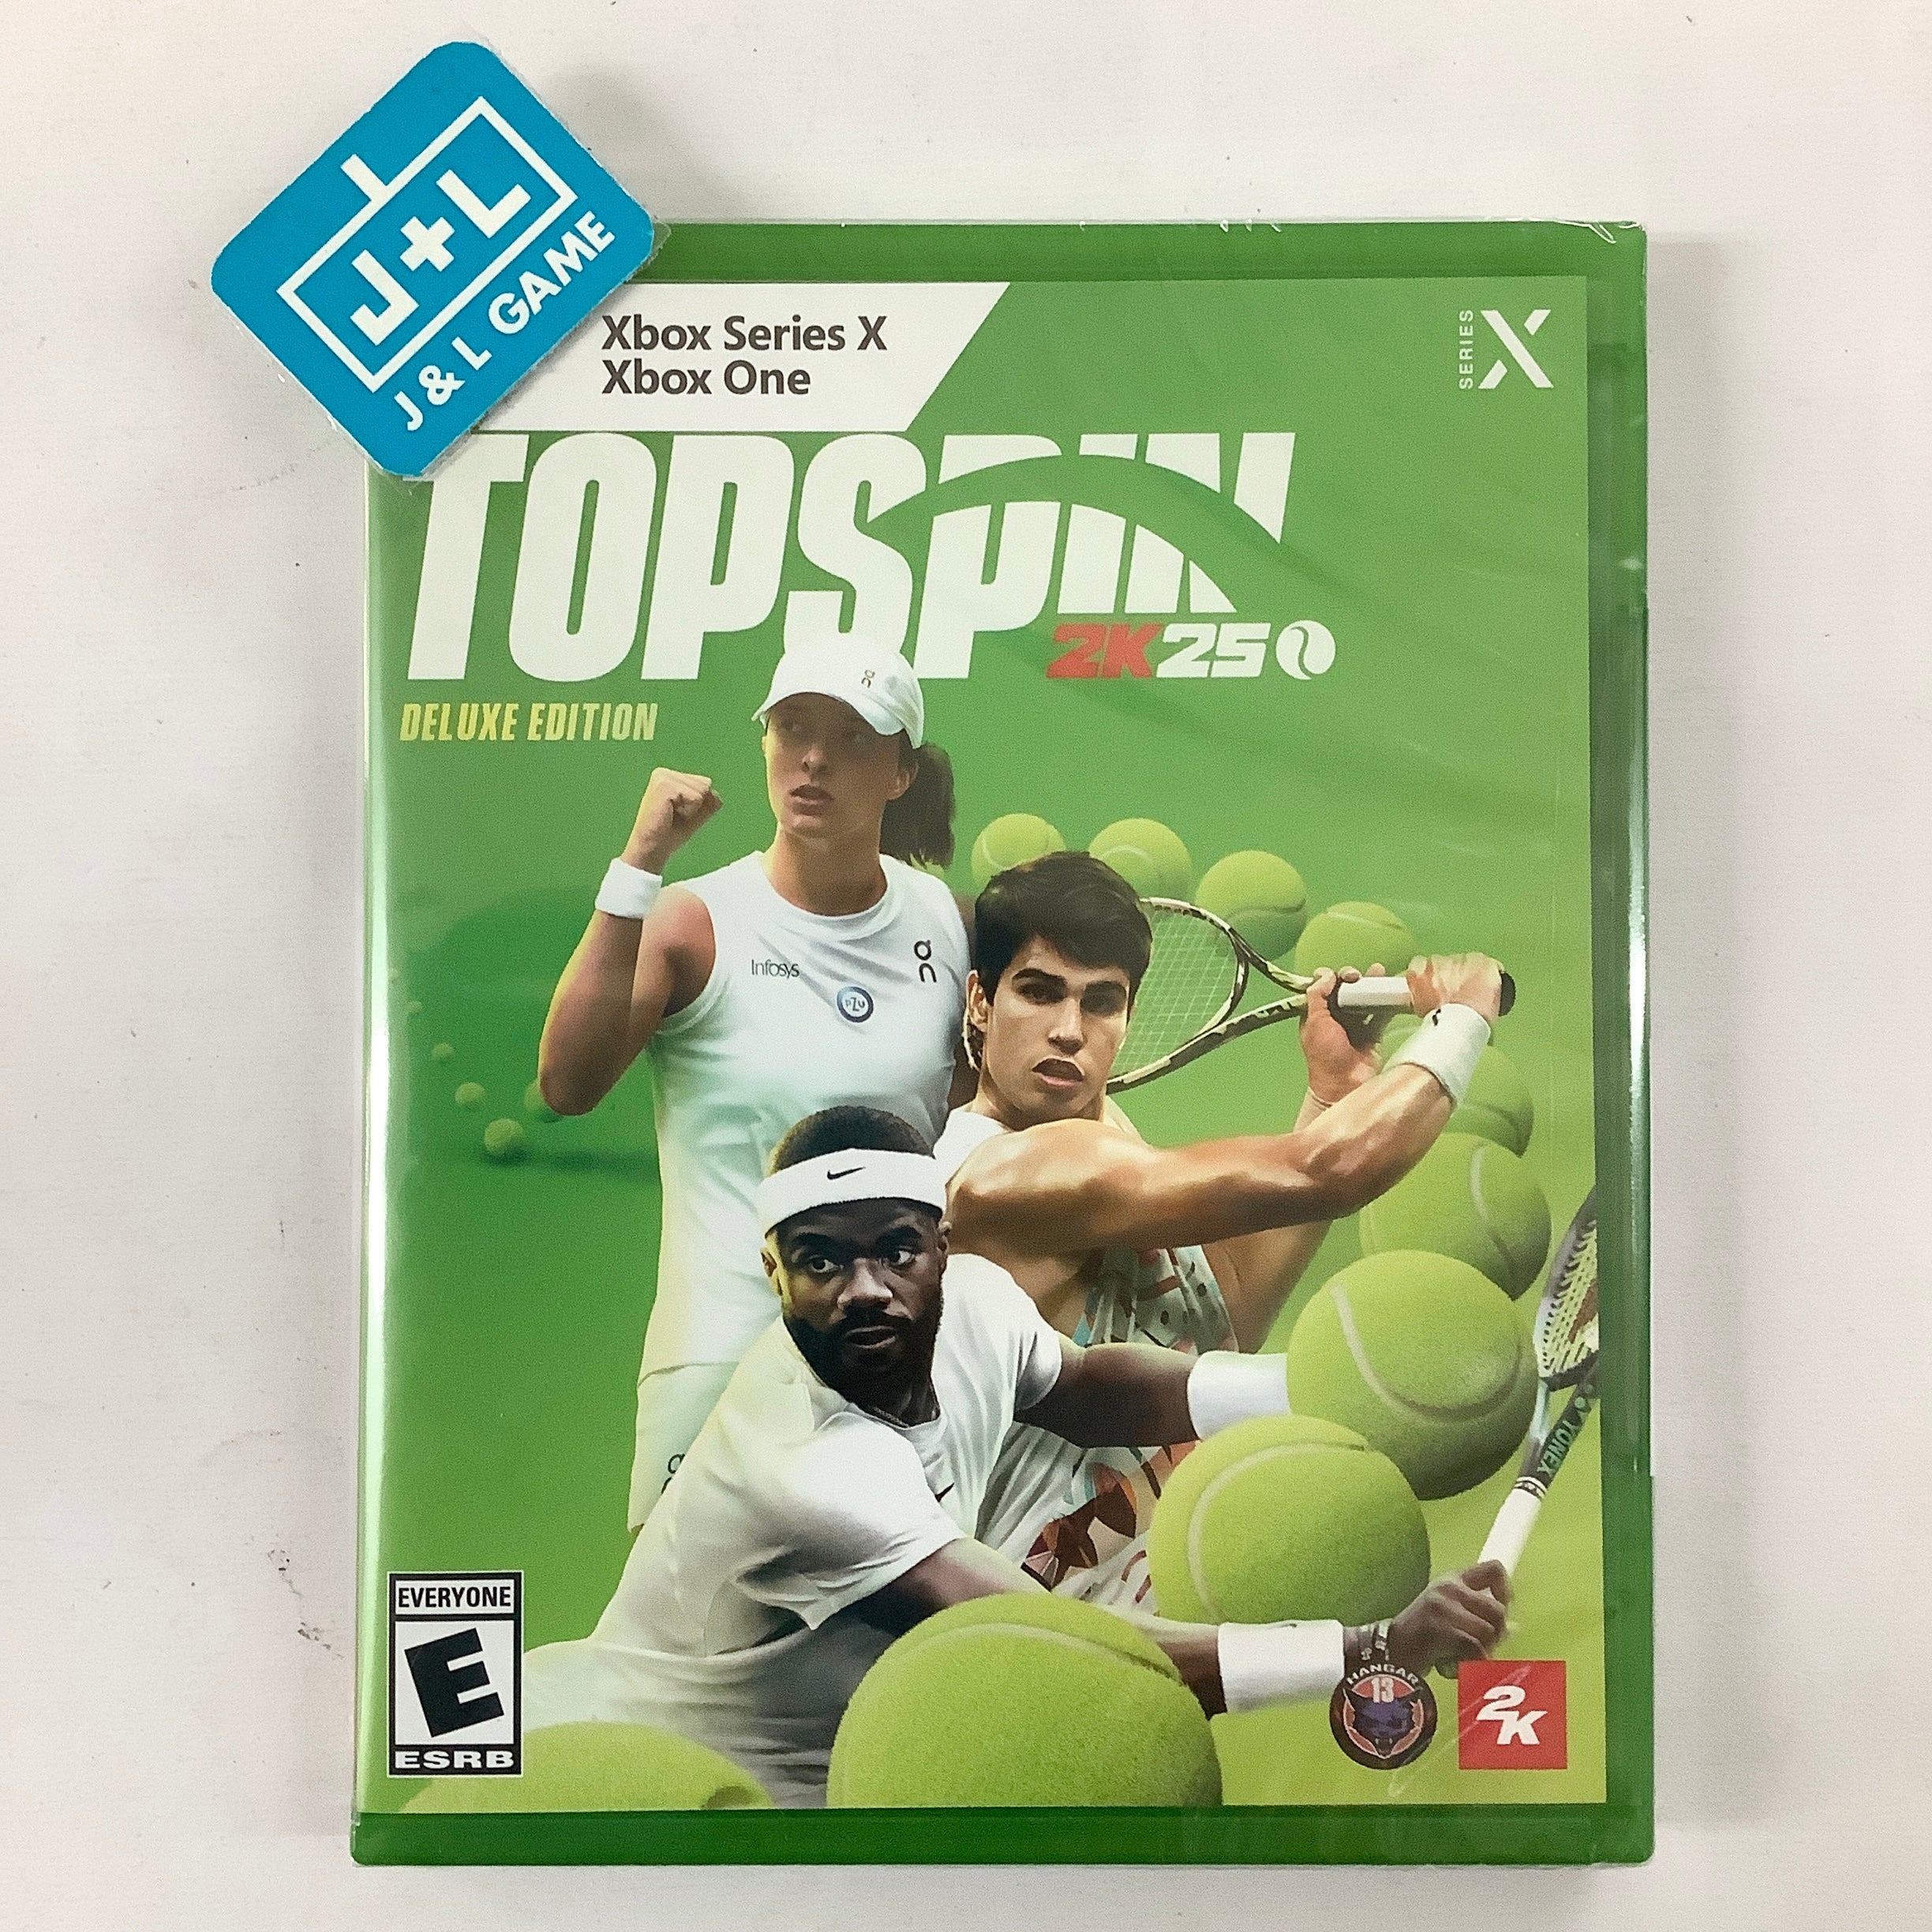 TopSpin 2K25 (Deluxe Edition) - (XSX) Xbox Series X